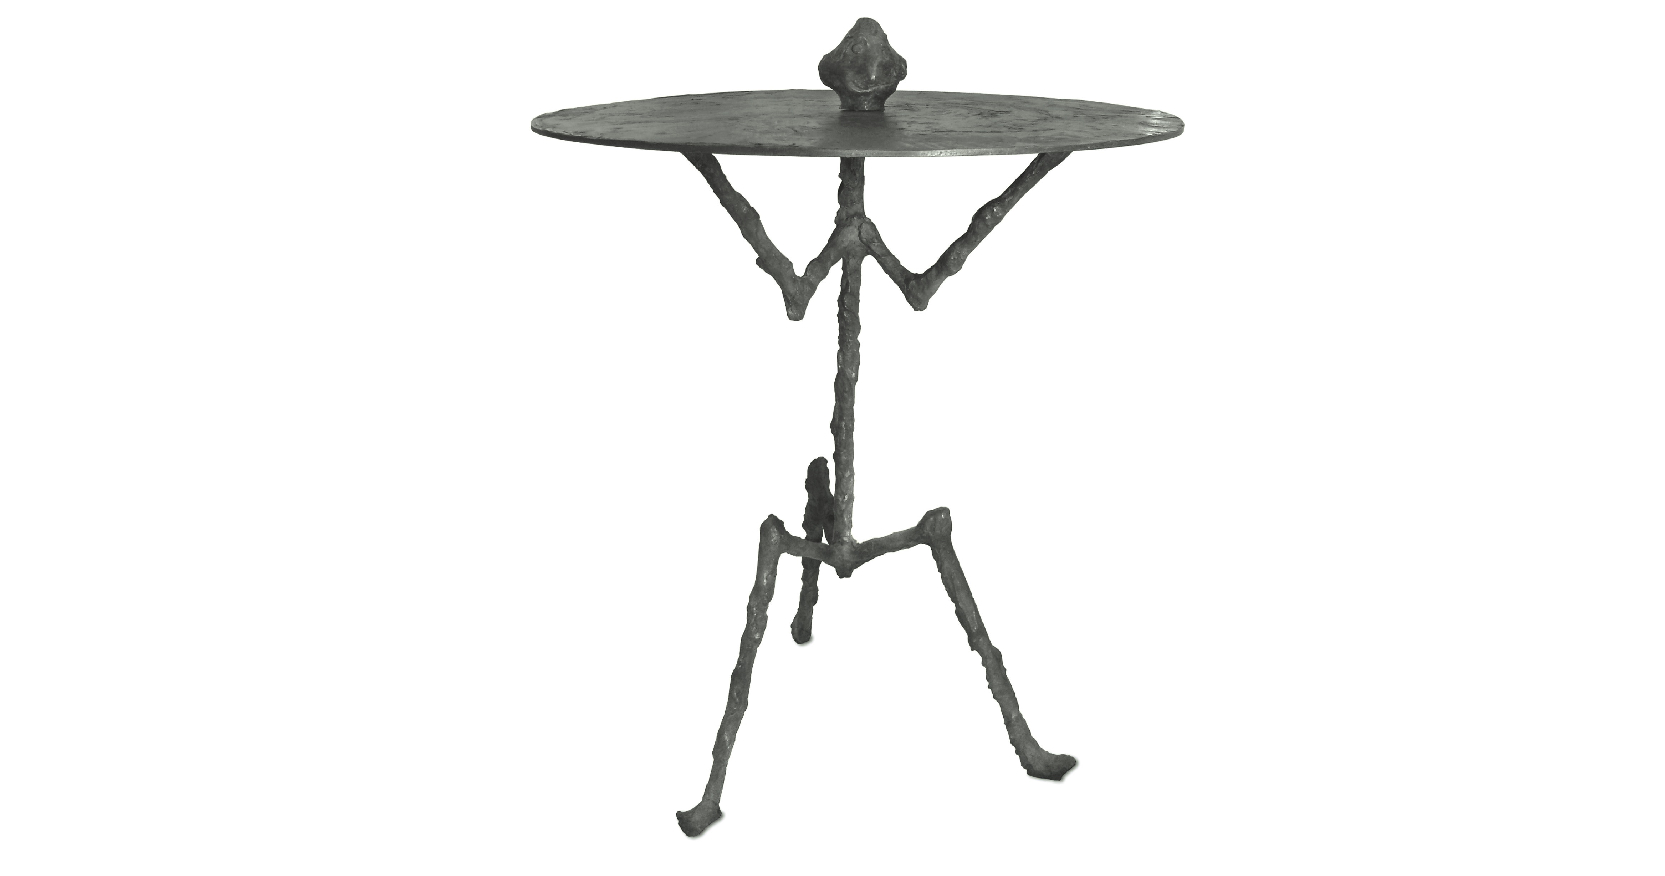 Elizabeth Garouste, small table sculpture round top in green bronze, in the shape of a stylized body, the head in the middle of the round top, two stems like arms, 3 stems evoking legs